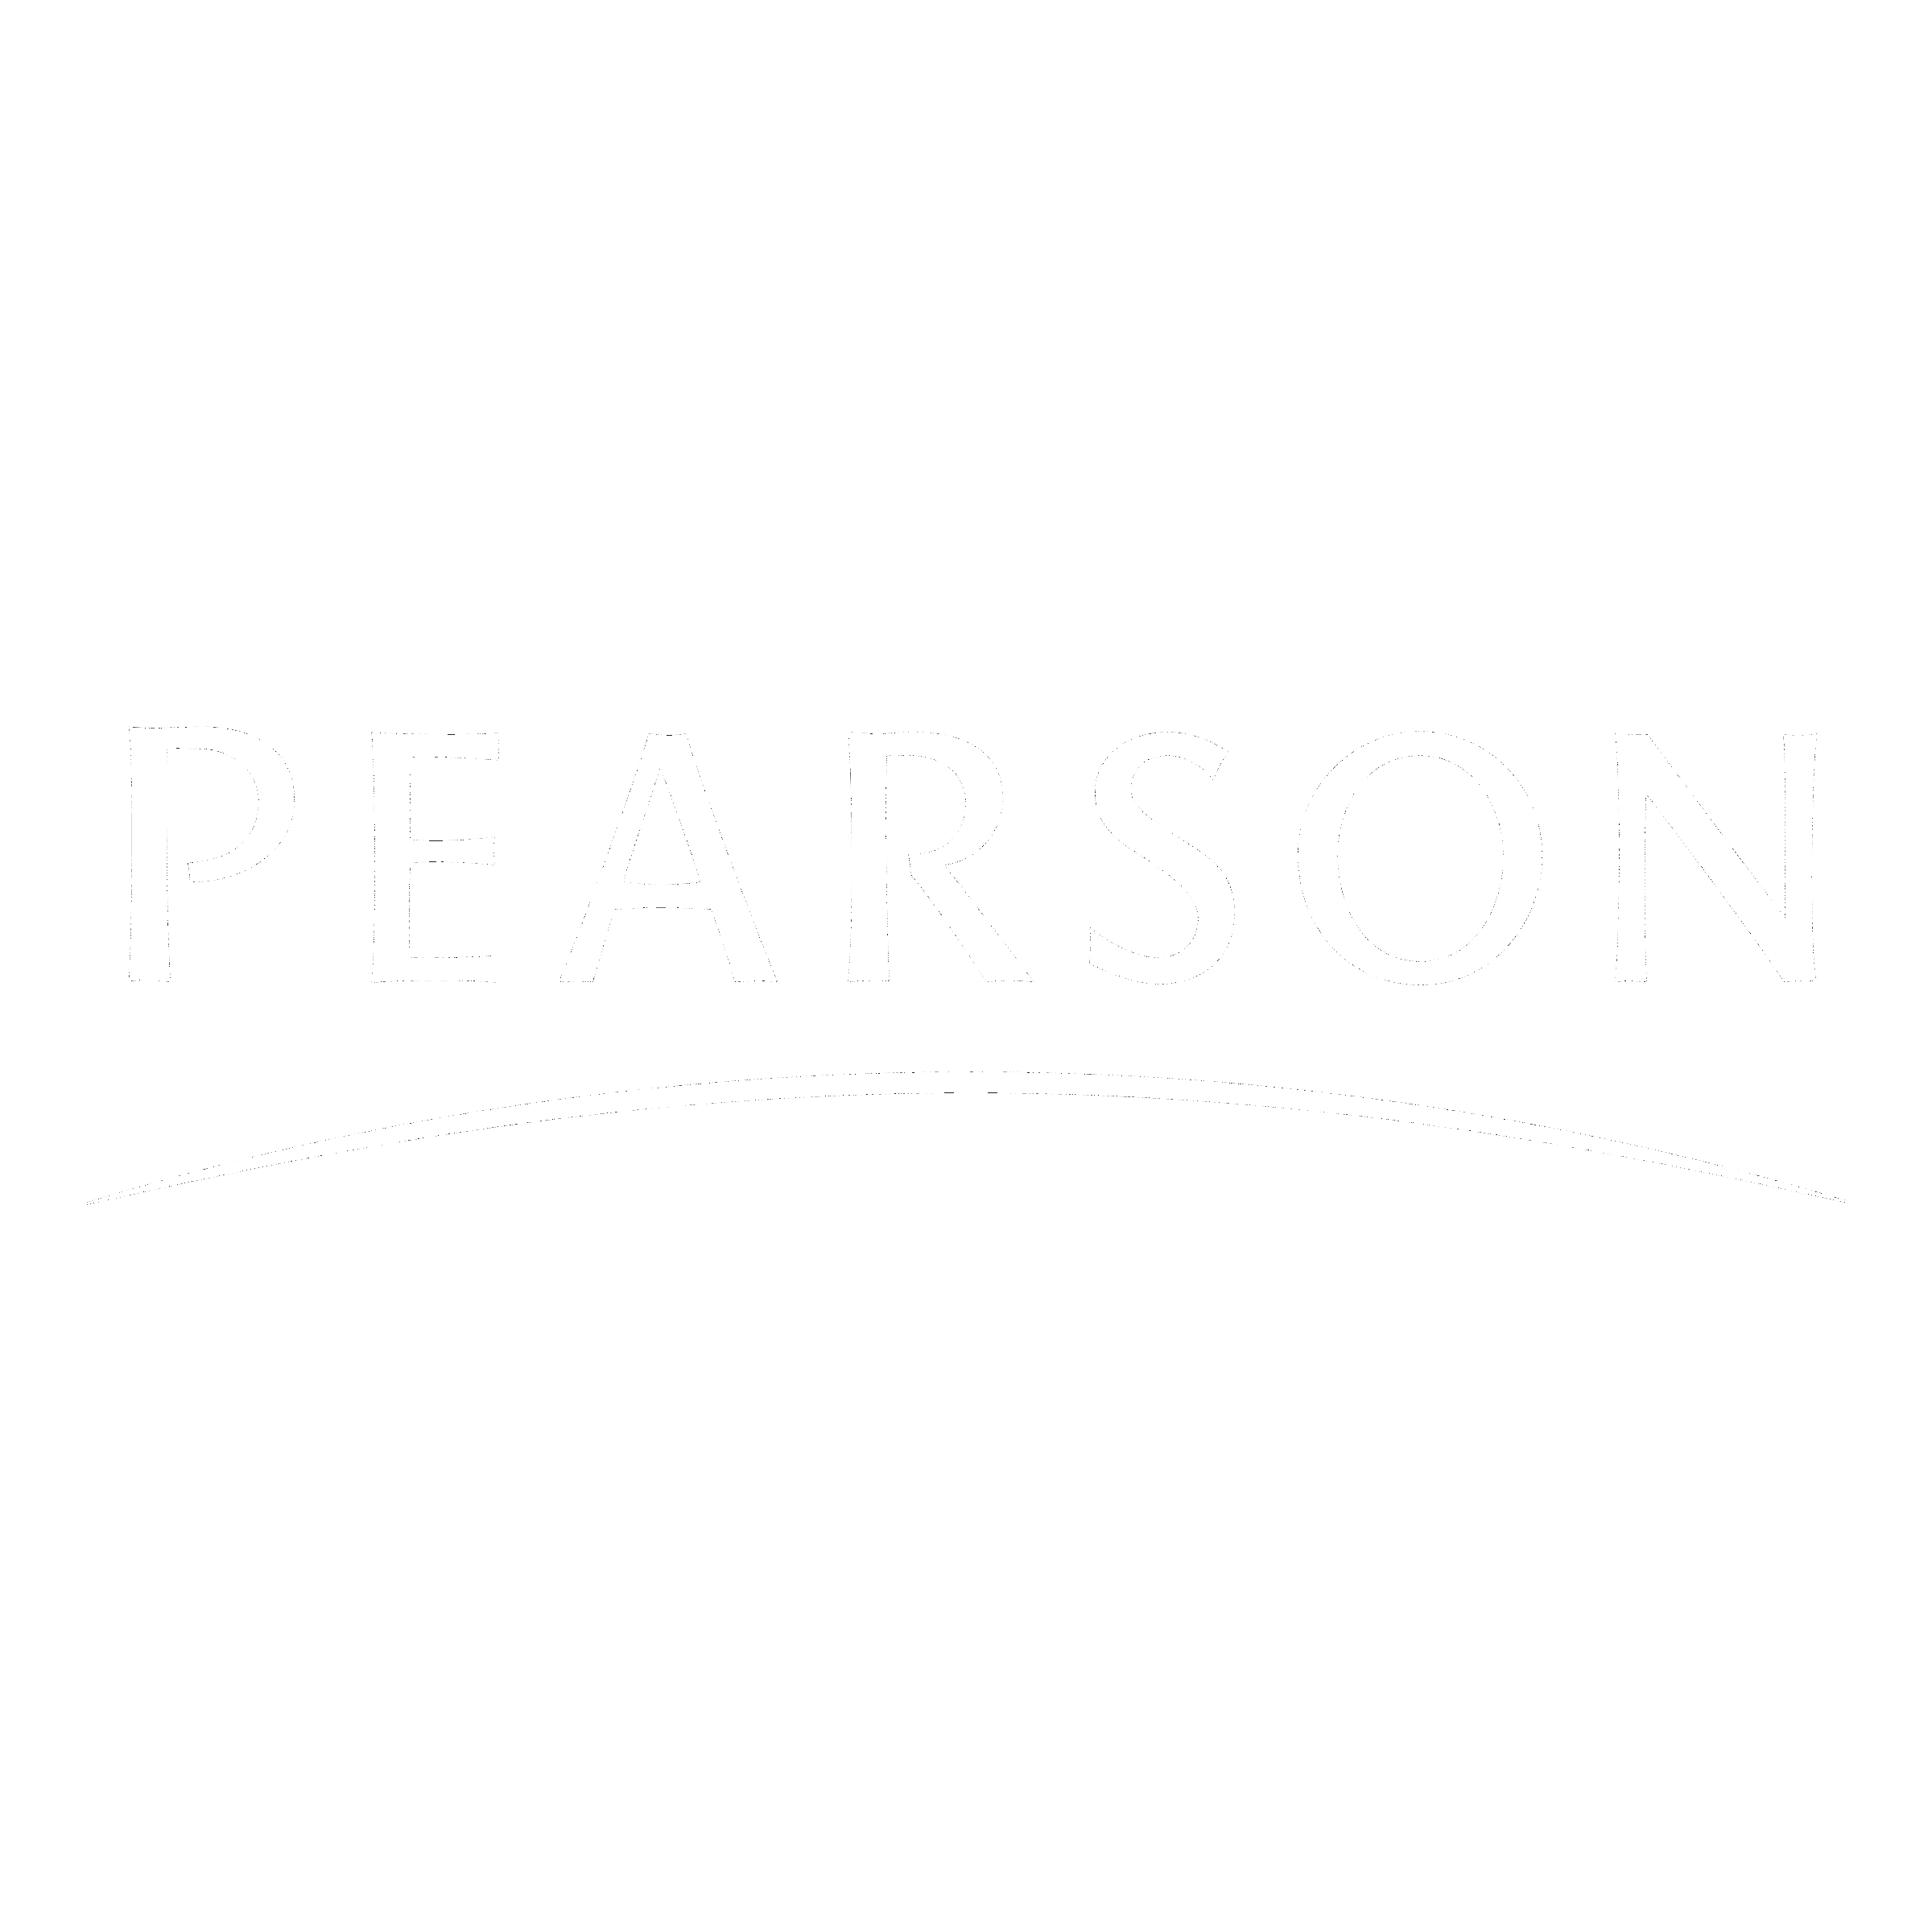 Pearson's Logo - Pearson Logo PNG Transparent & SVG Vector - Freebie Supply